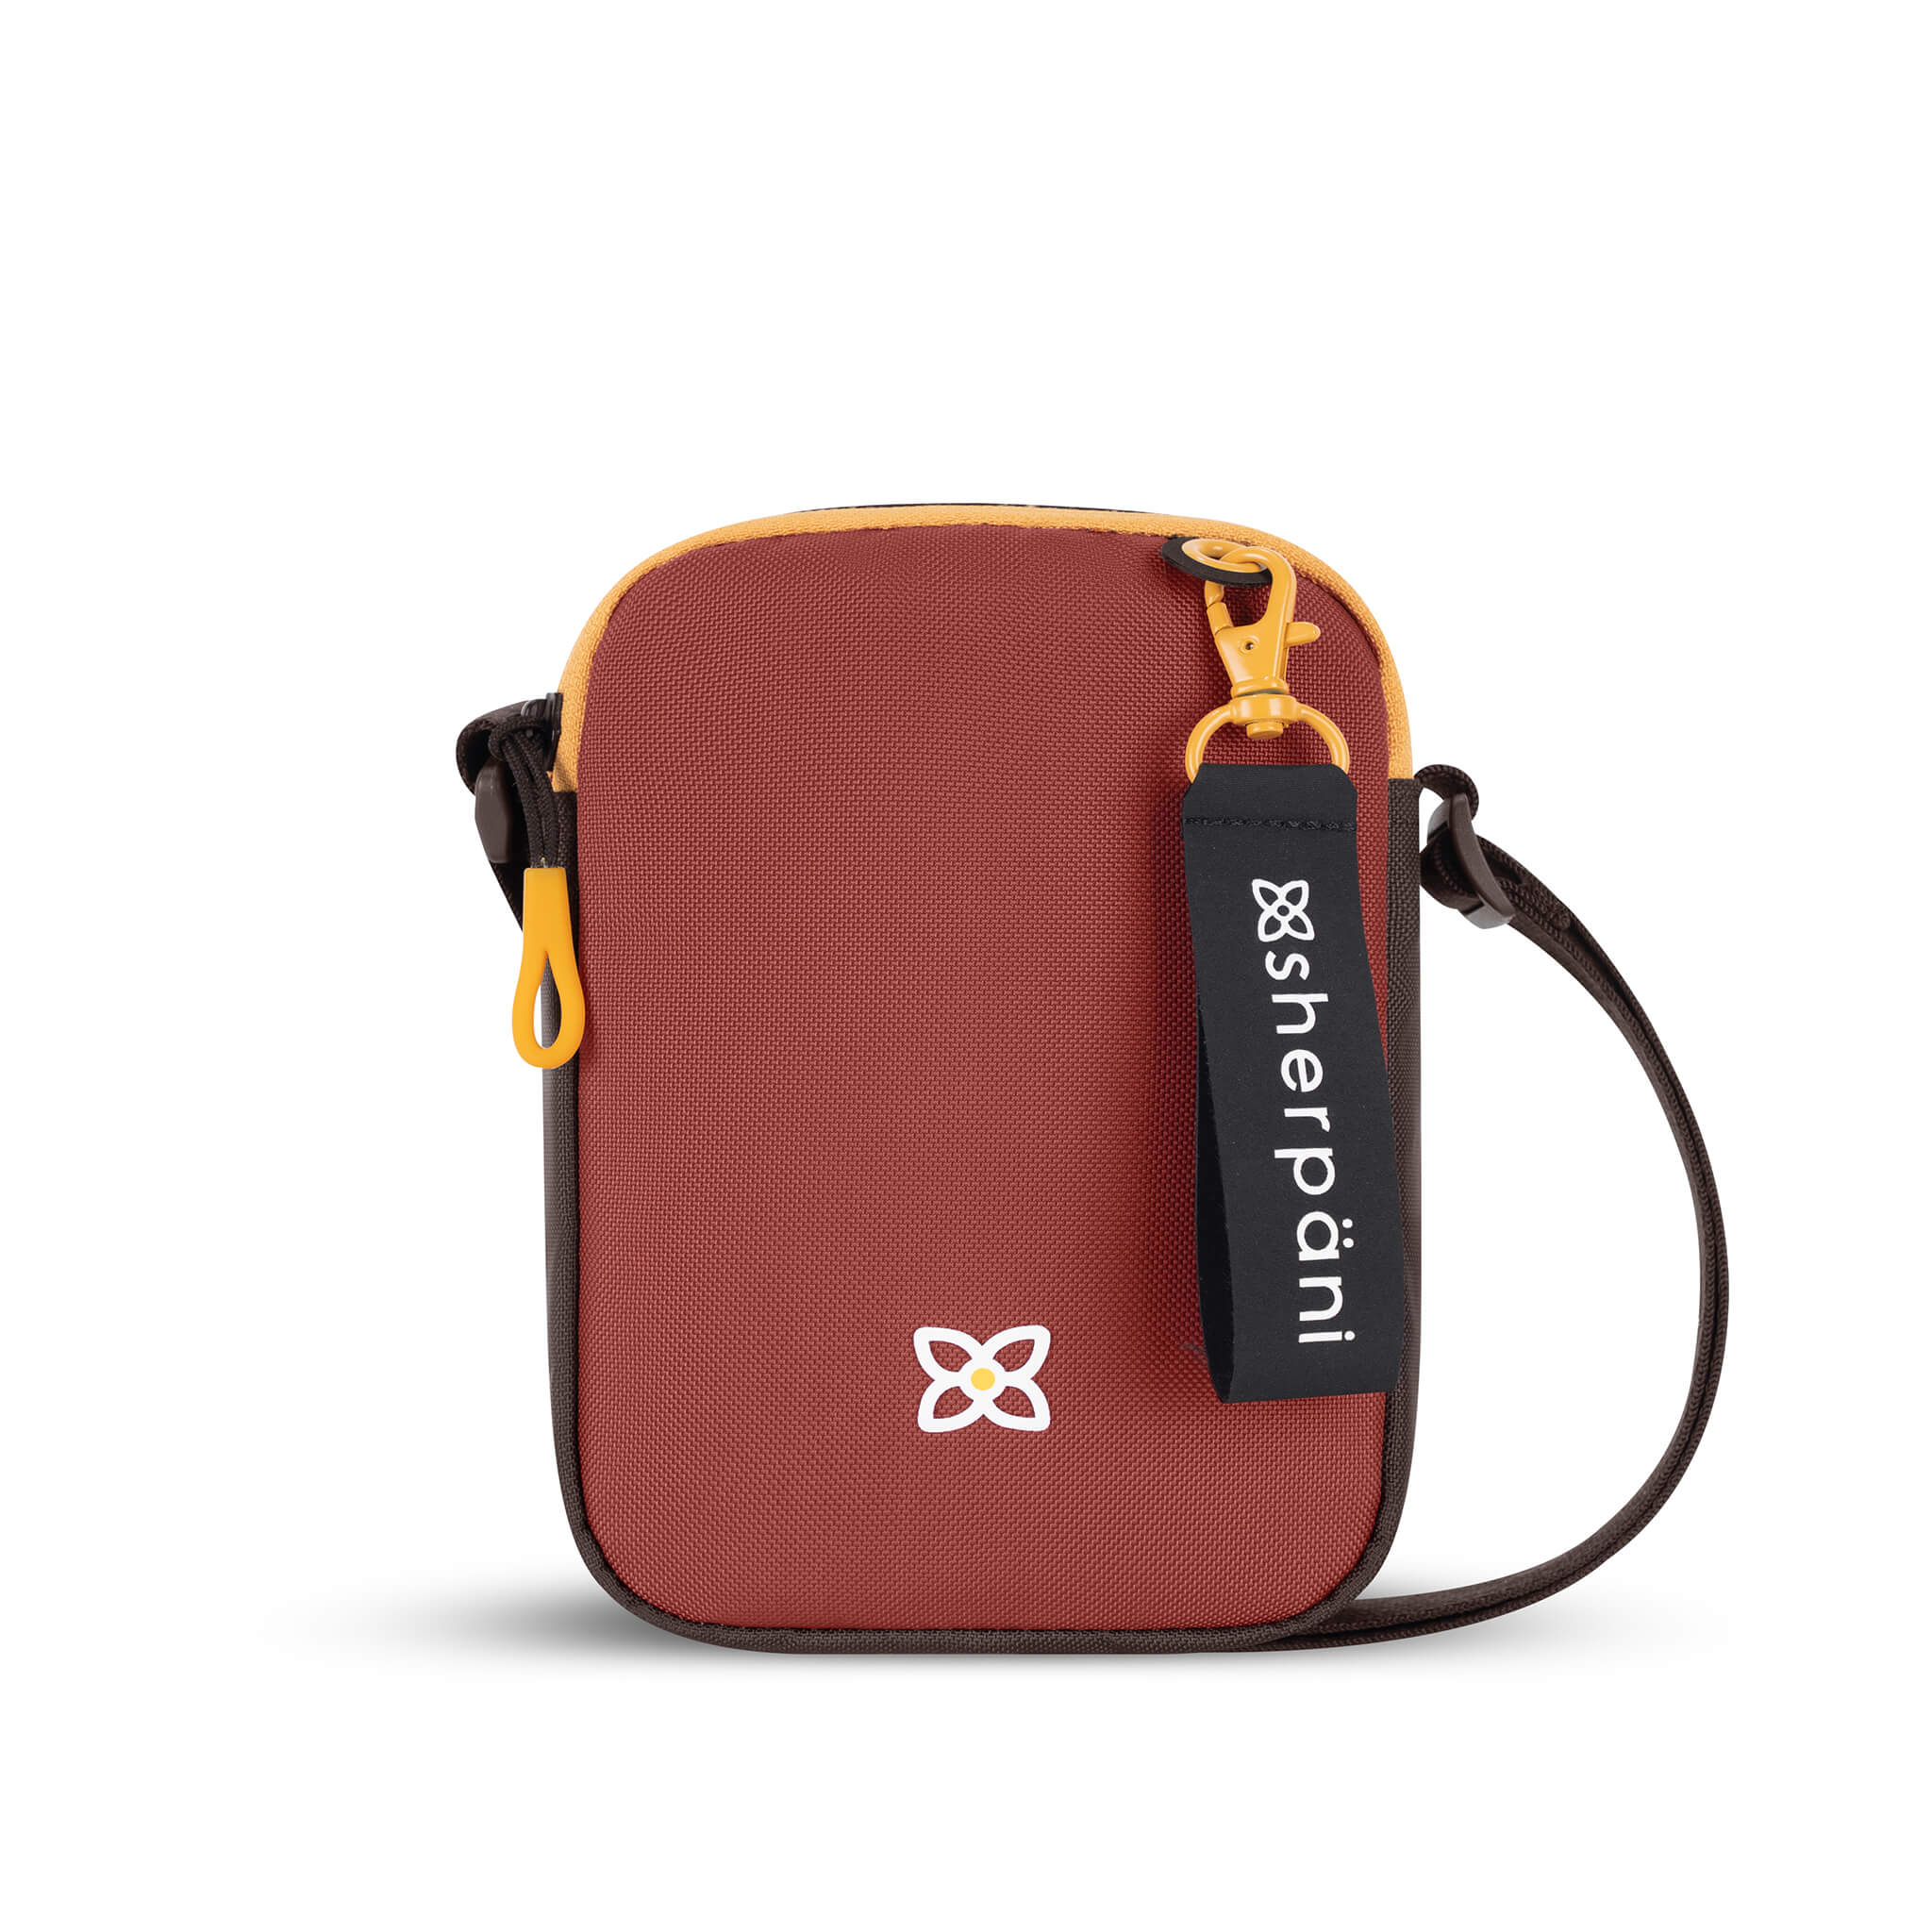 Flat front view of Sherpani mini crossbody purse, the Rogue in Cider. Rogue features include an adjustable crossbody strap, detachable keychain, compact design, minimalist bag and RFID protection. The Cider color is two-toned in burgundy and dark brown with yellow accents. 